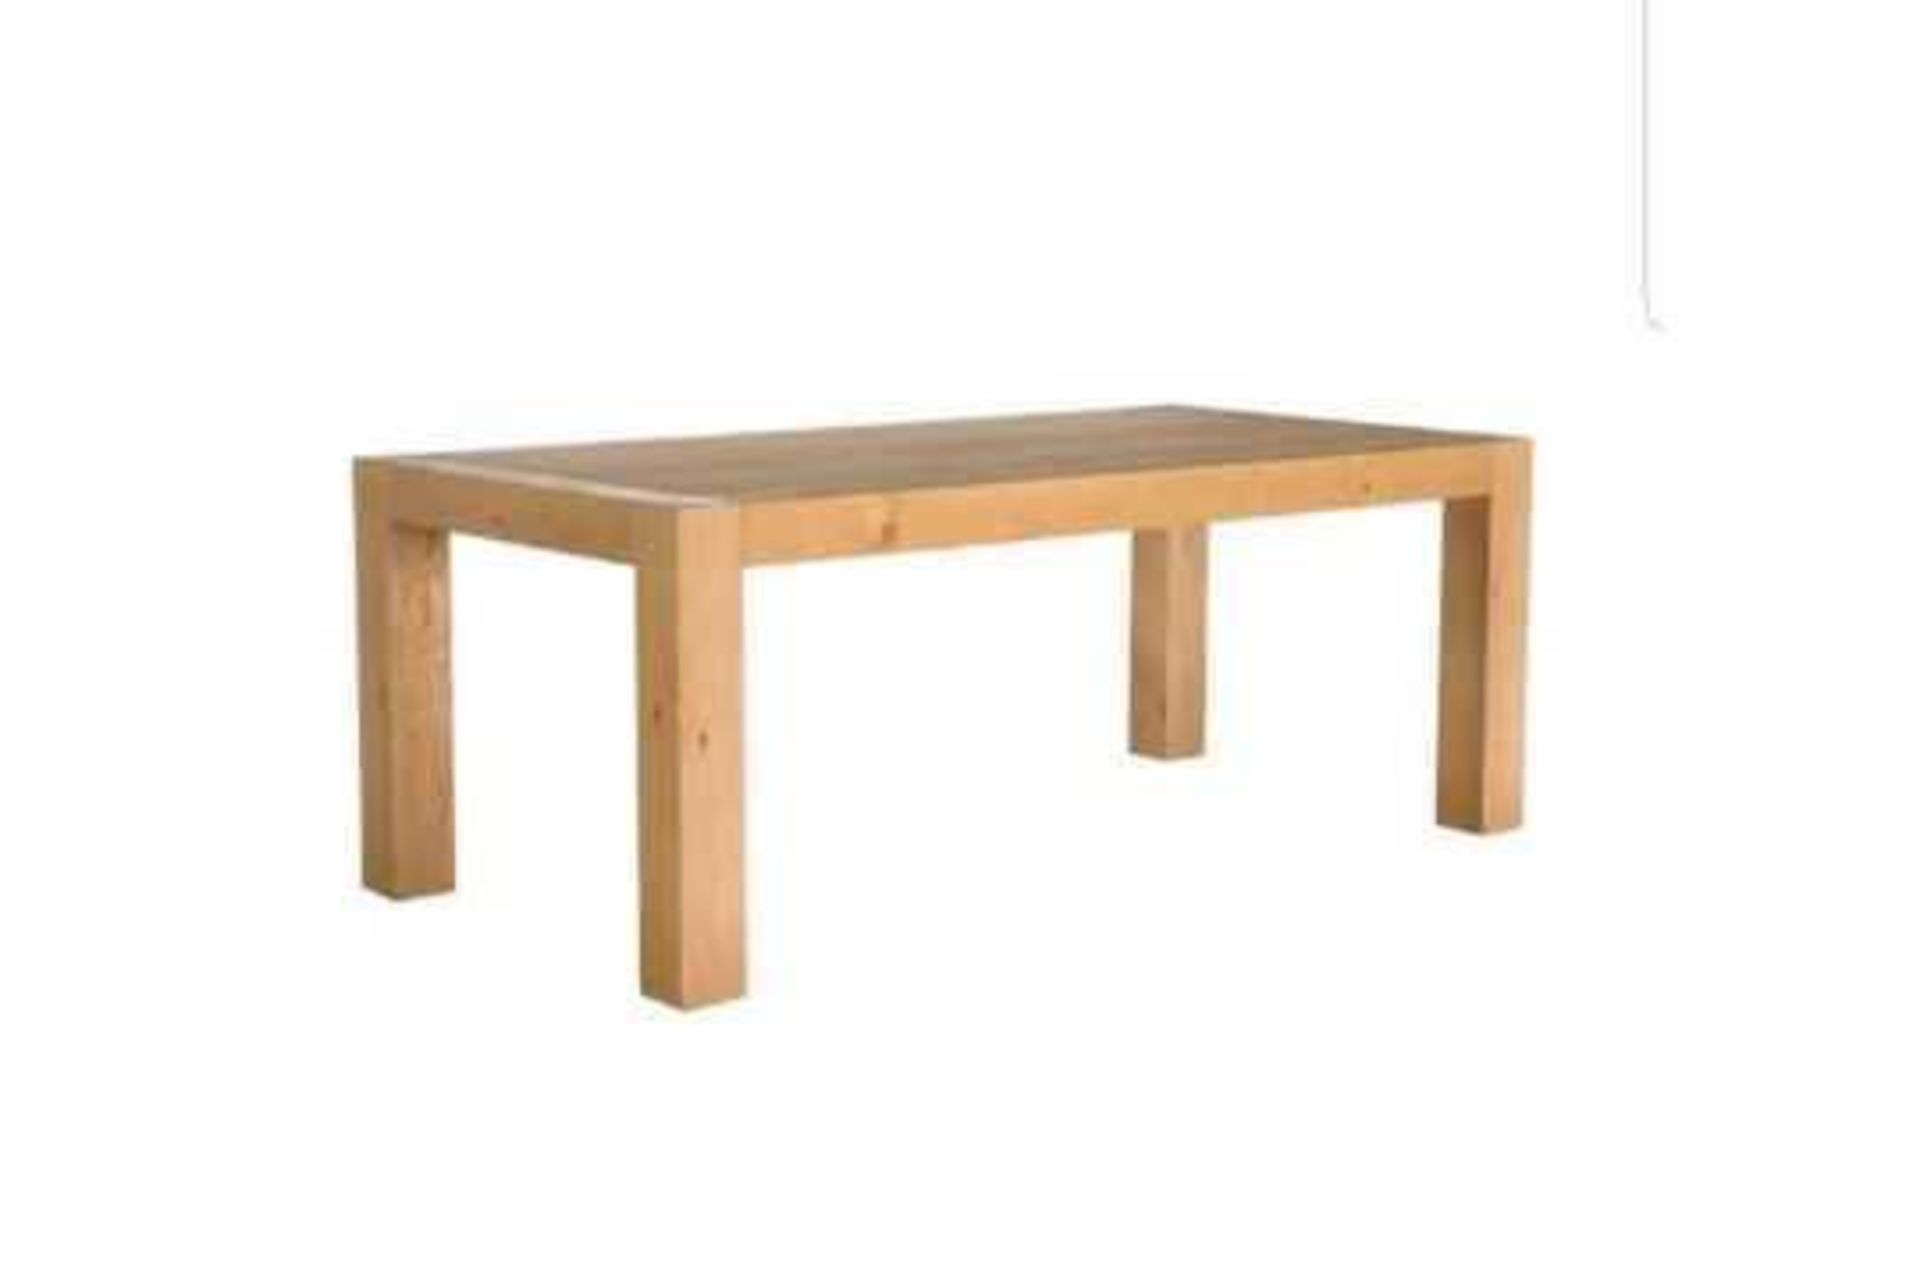 RRP £699, Sourced From Harveys, Lindos Large Oak Dining Table